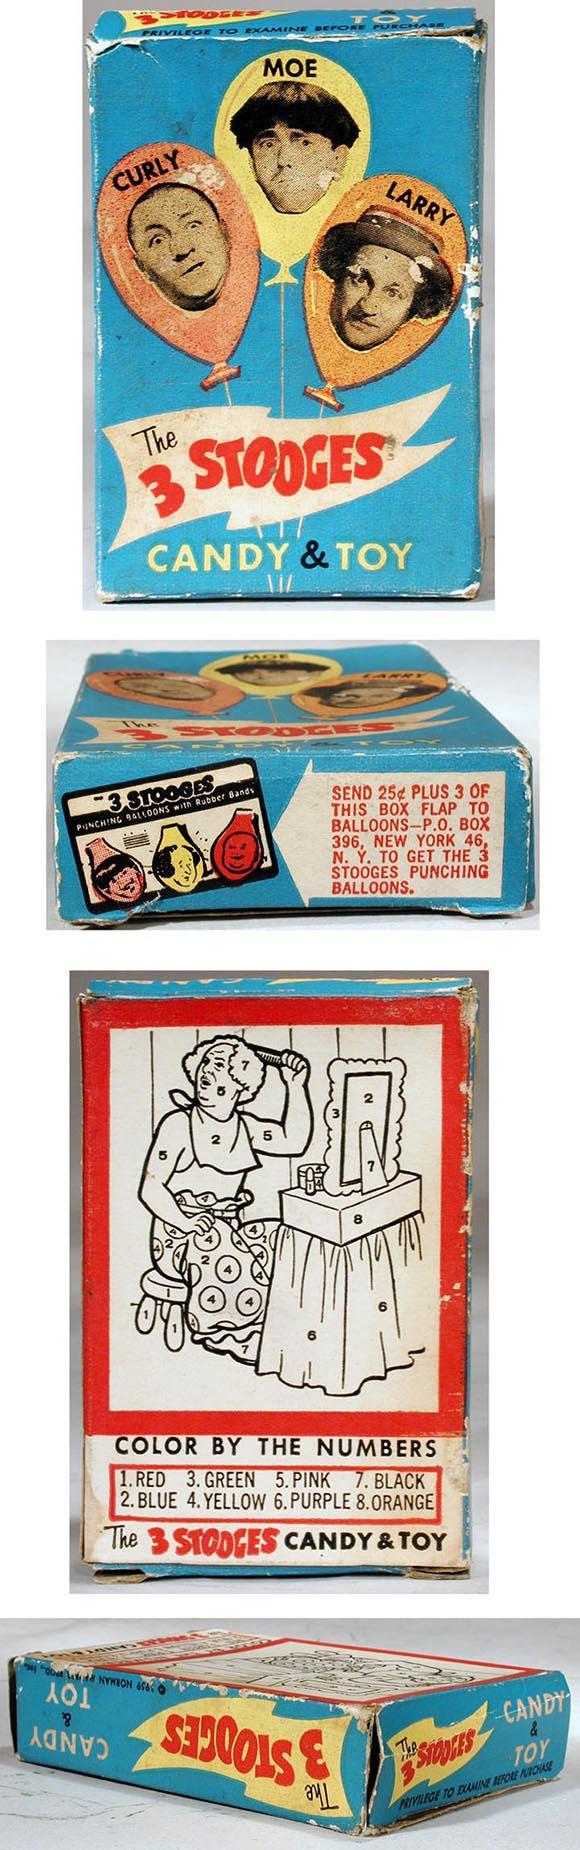 1959 The 3 Stooges Candy & Toy Box